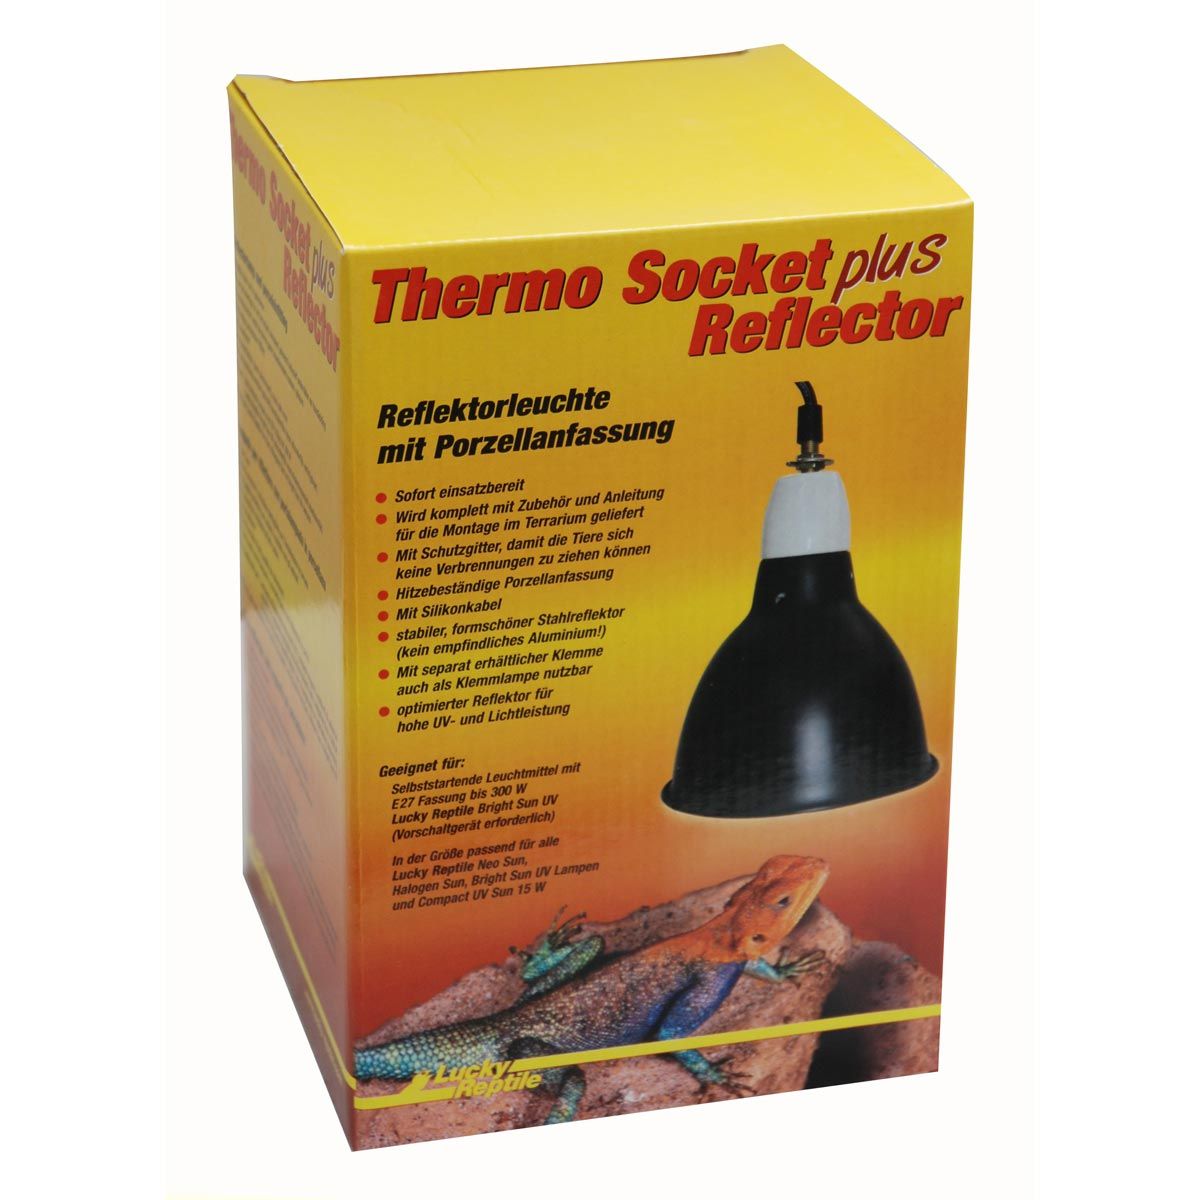 Lucky Reptile - Thermo Socket plus Reflector